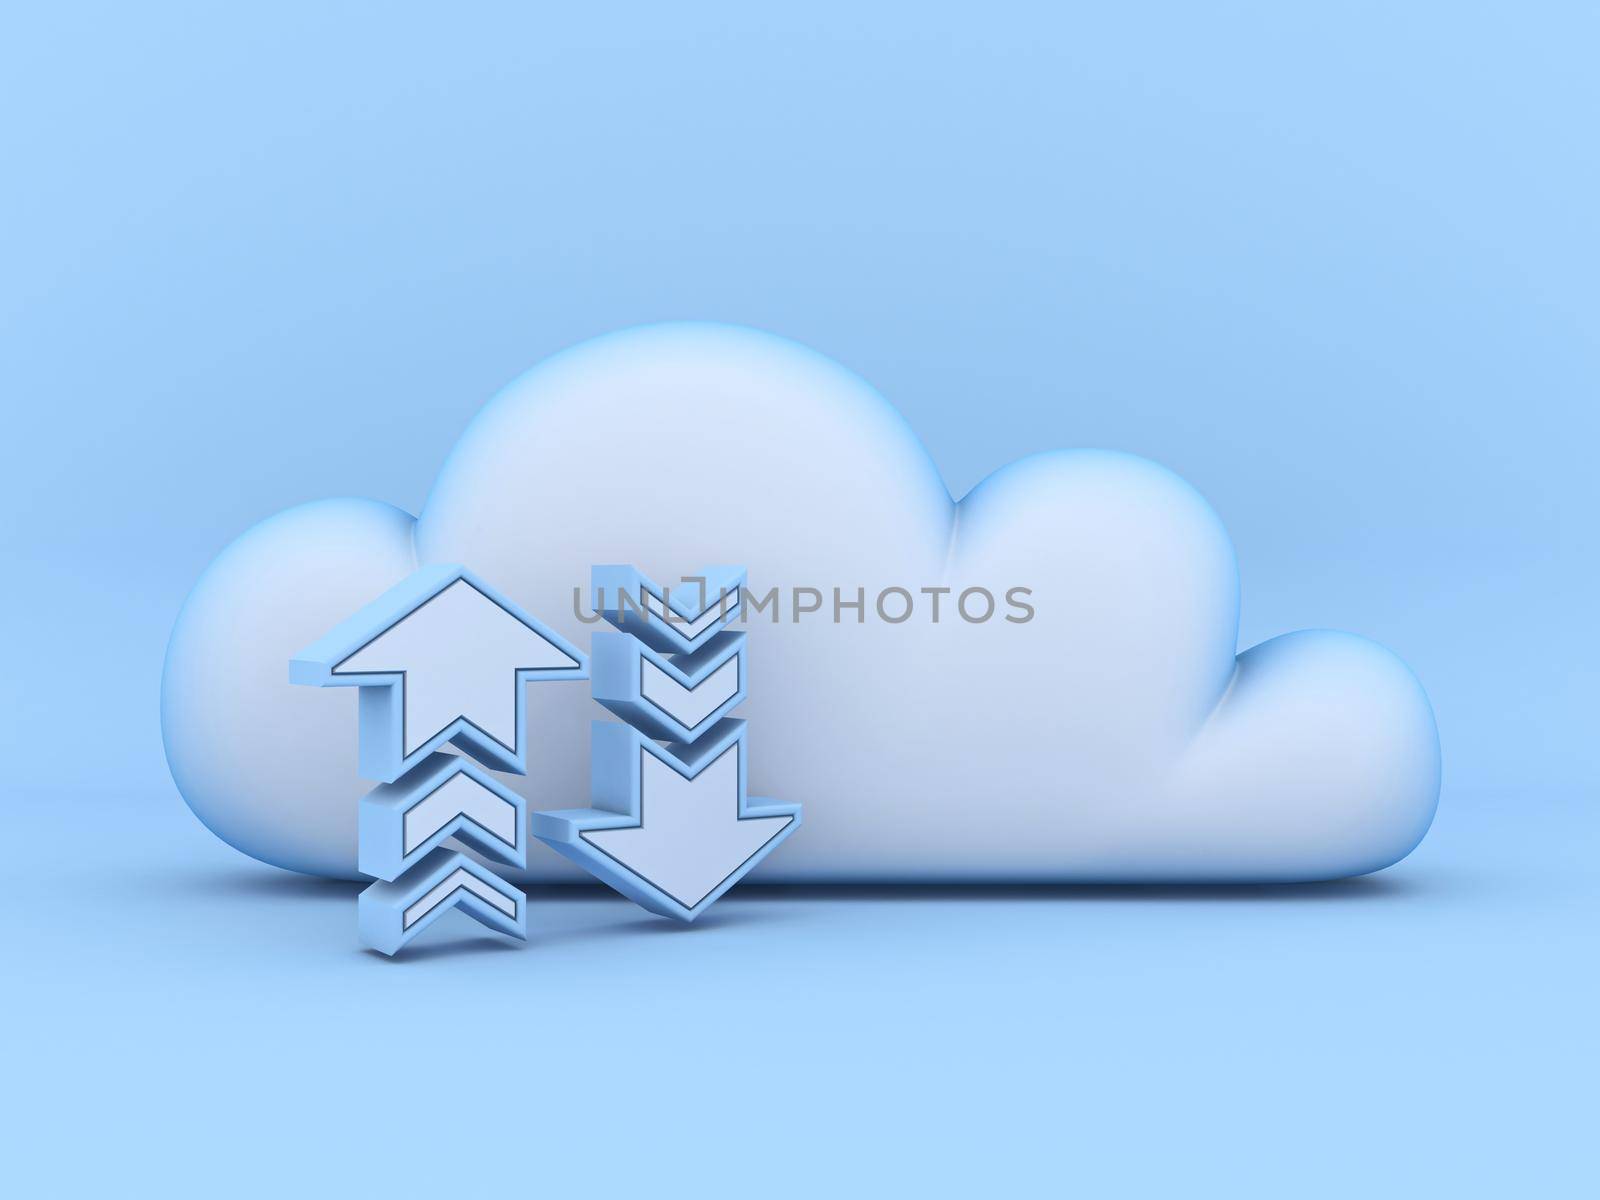 Cloud concept of download and upload 3D rendering illustration isolated on blue background